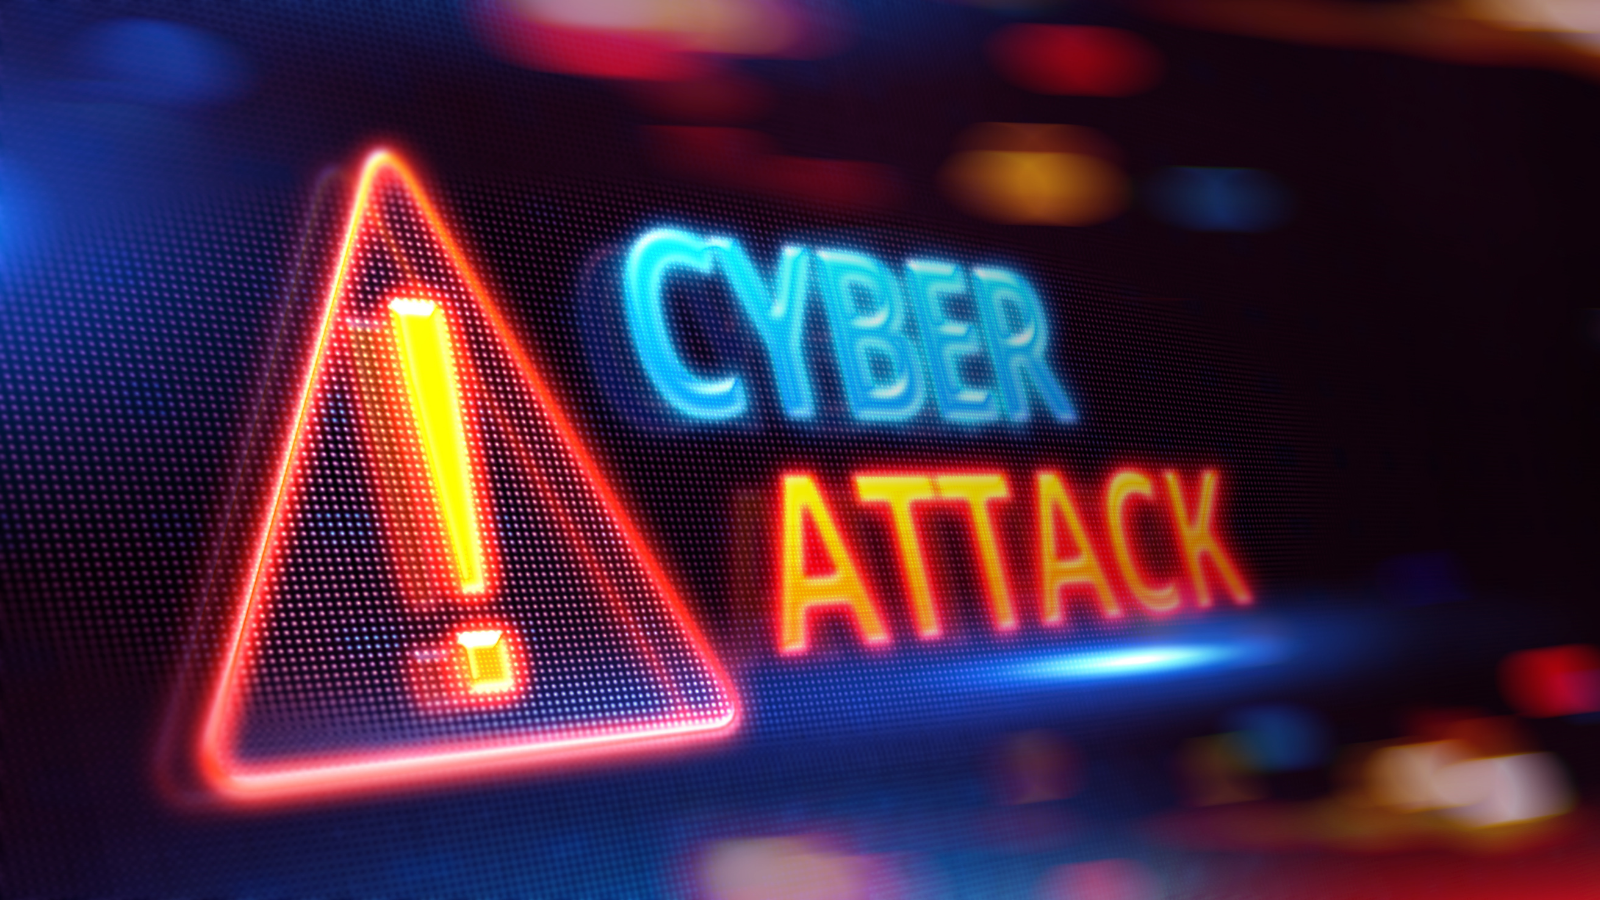 Learn how to prevent cyberattacks on your business in 2022